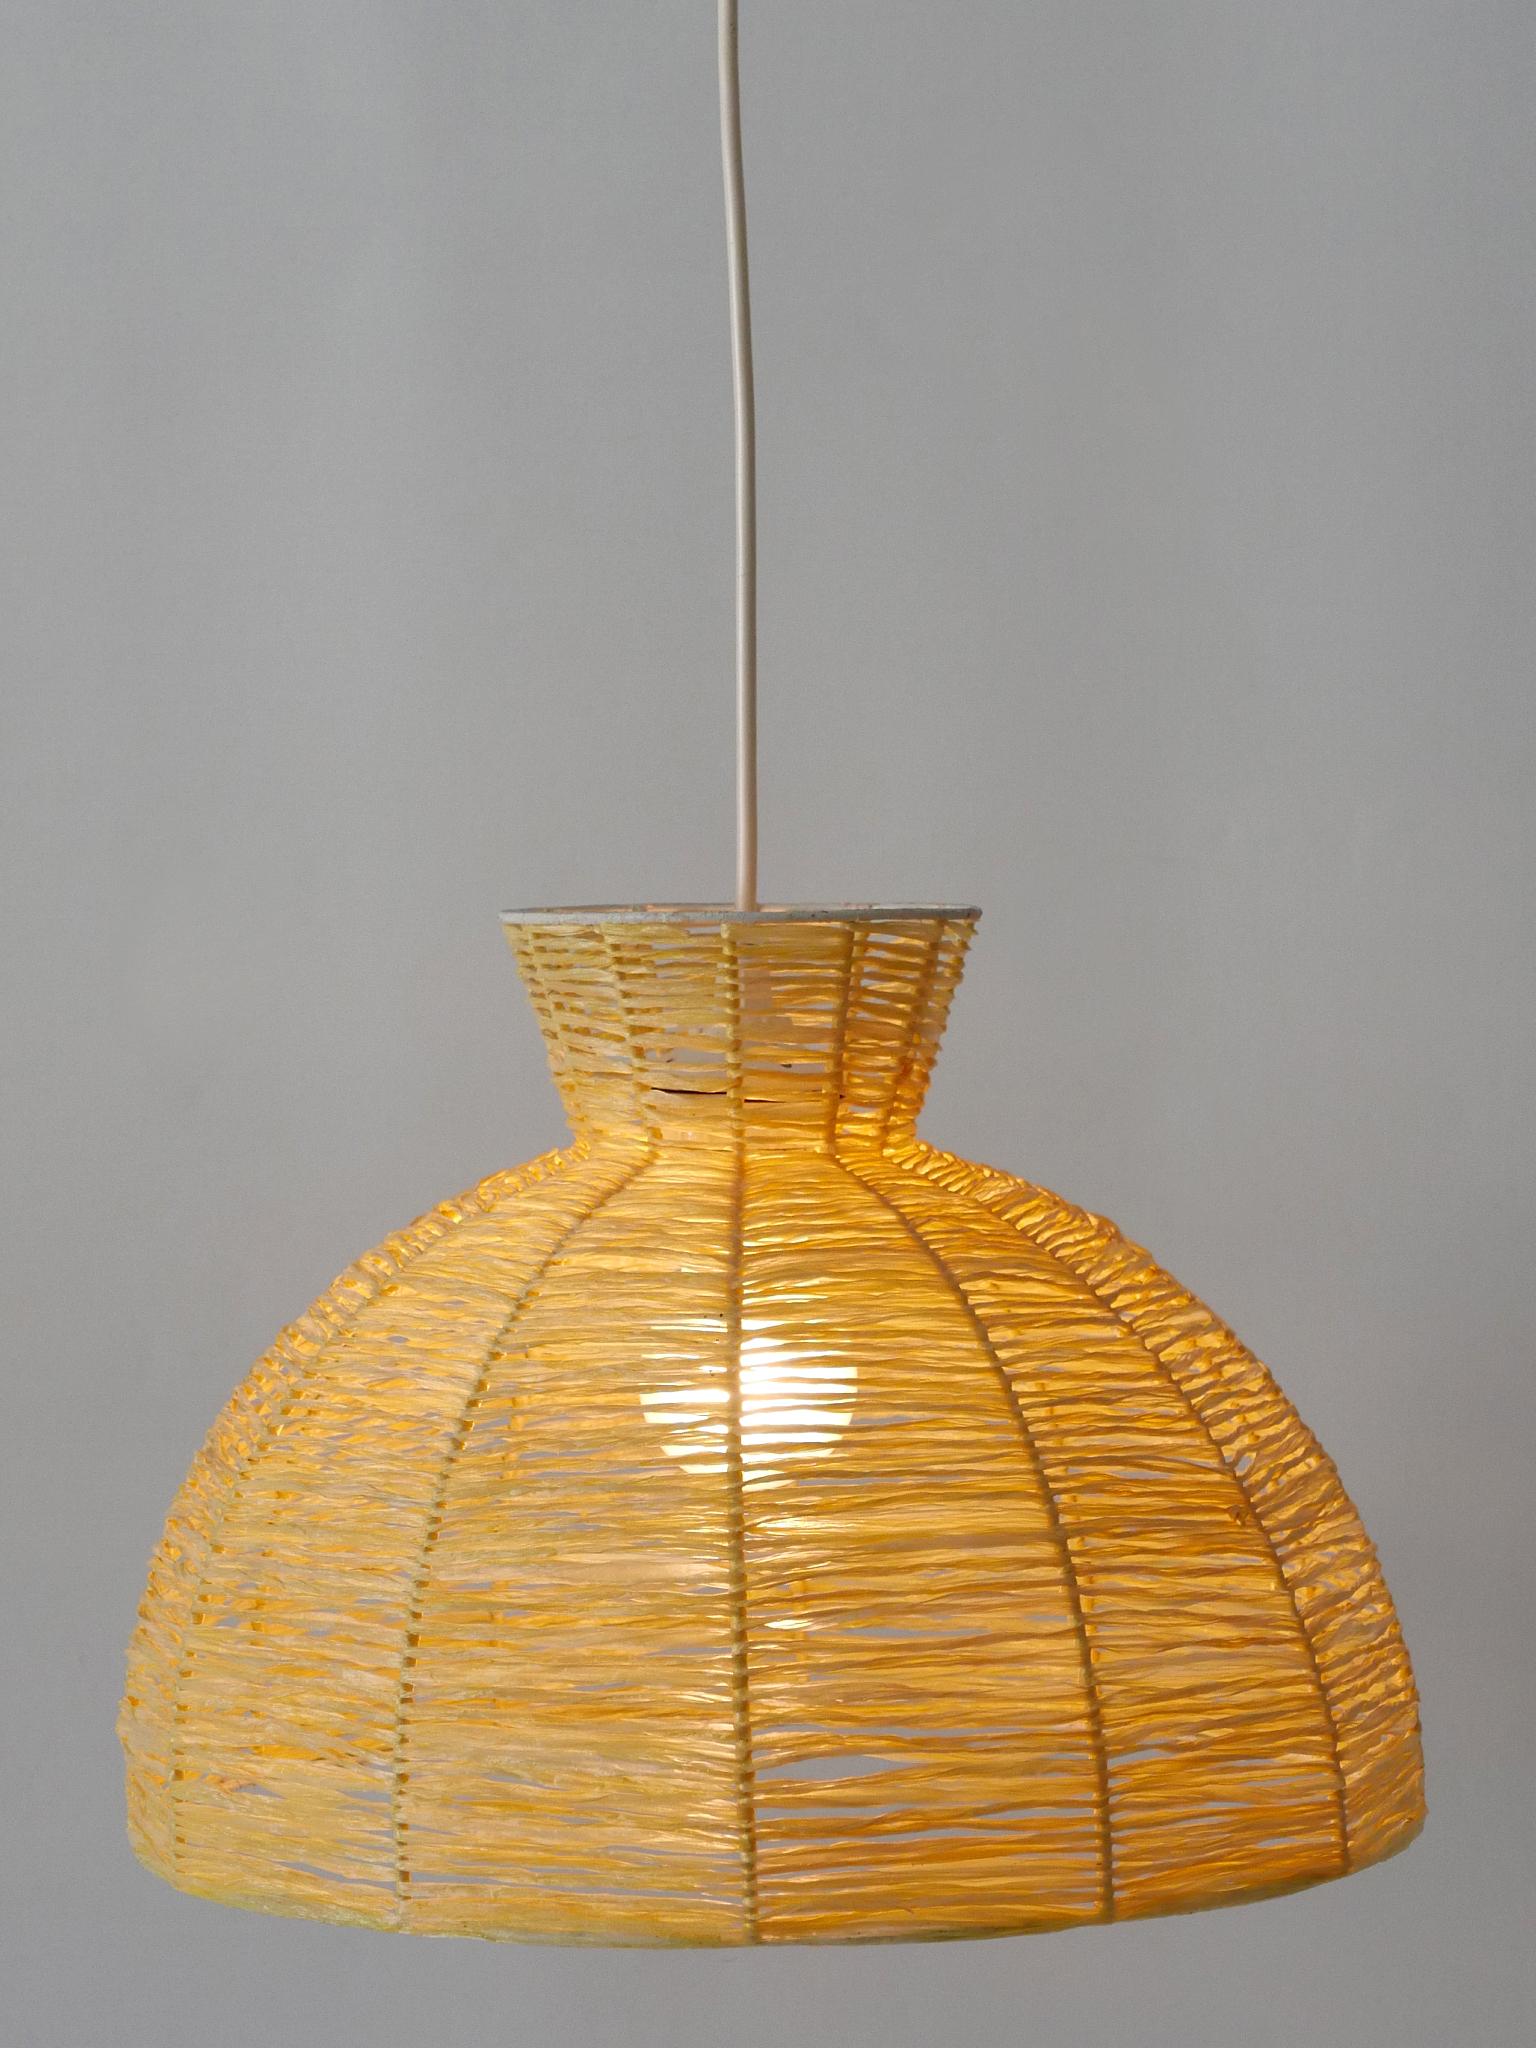 Rare, elegant and highly decorative Mid-Century Modern pendant lamp / hanging light. Manufactured in Germany, 1970s.

Executed in raffia bast and metal, the pendant lamp comes with 1 x E27 / E26 Edison screw fit bulb holder, is wired and in